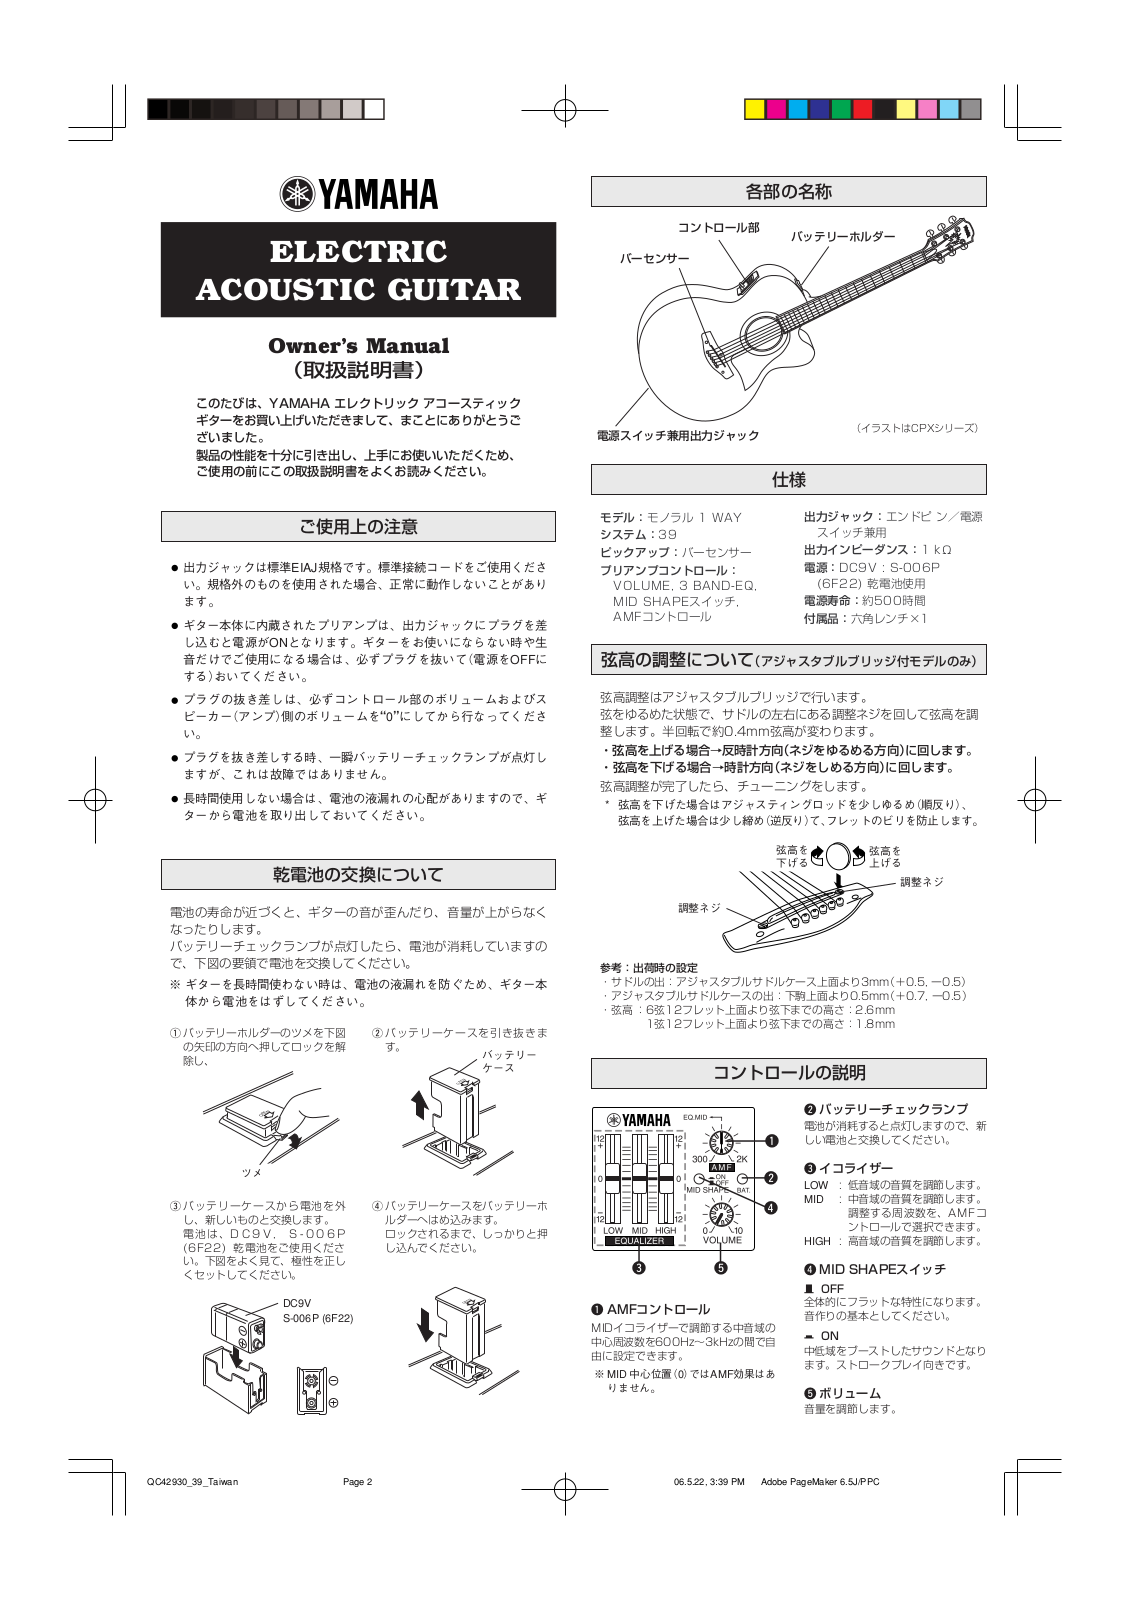 Yamaha CPX10, CPX7, CPX5, DWX8C, FGXB1 User Manual